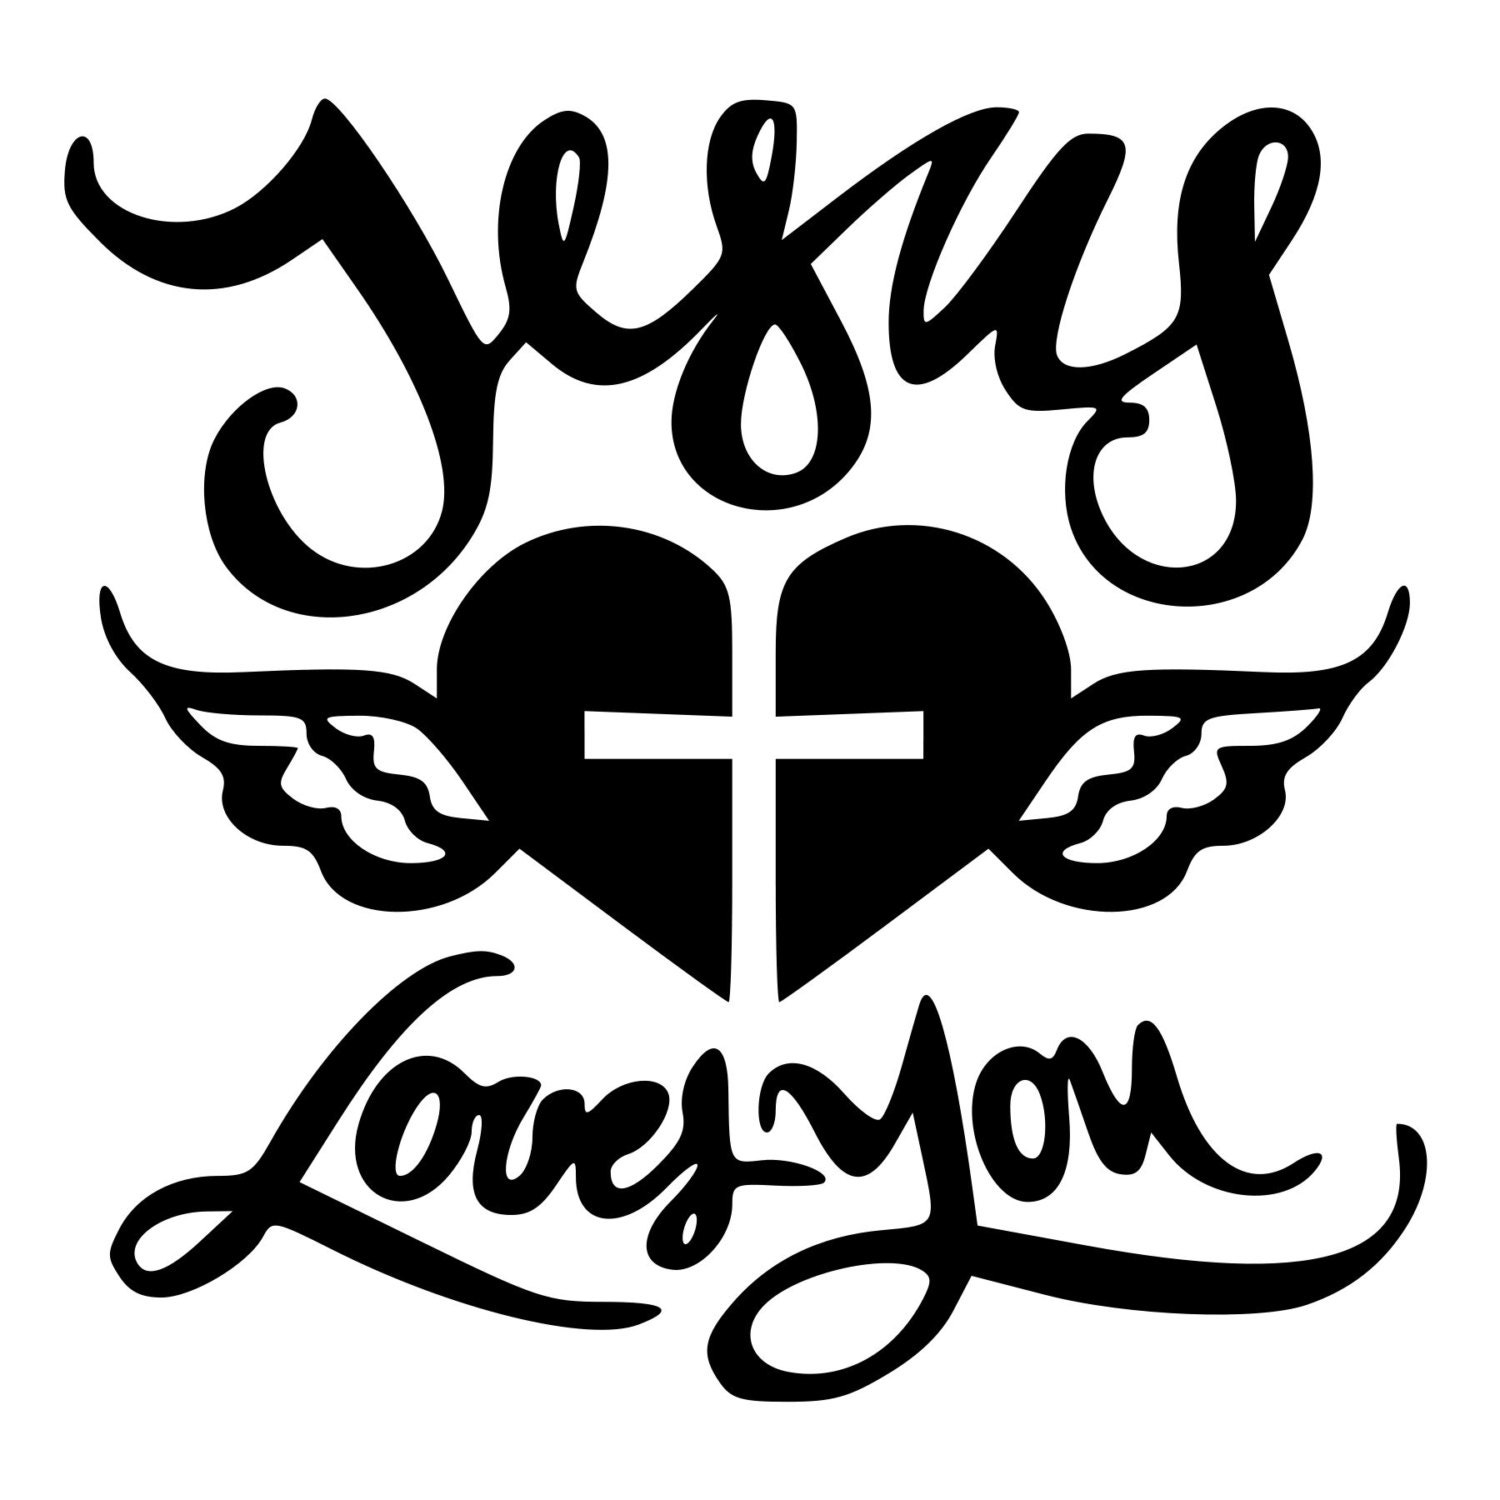 Jesus Loves You Heart And Cross Die-Cut Decal Car Window Wall